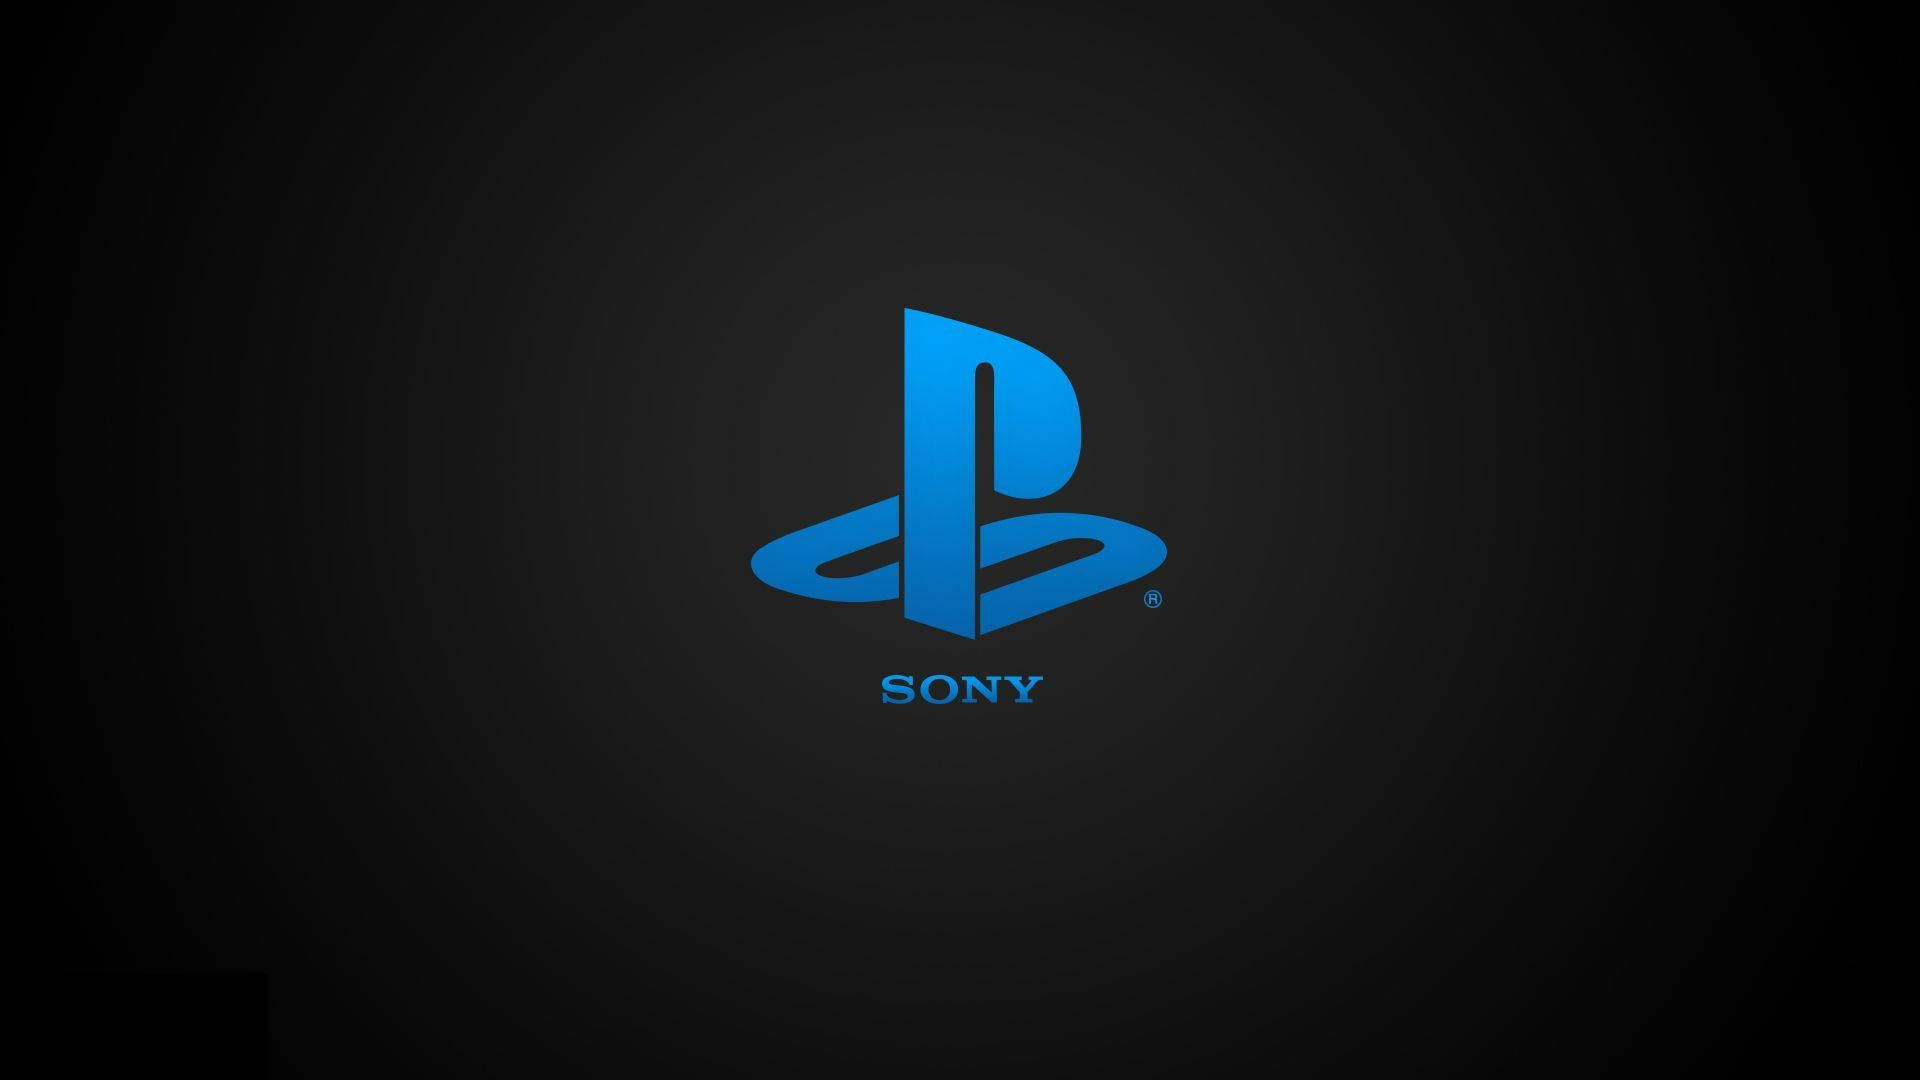 Sony Ps4 Background Wallpaper